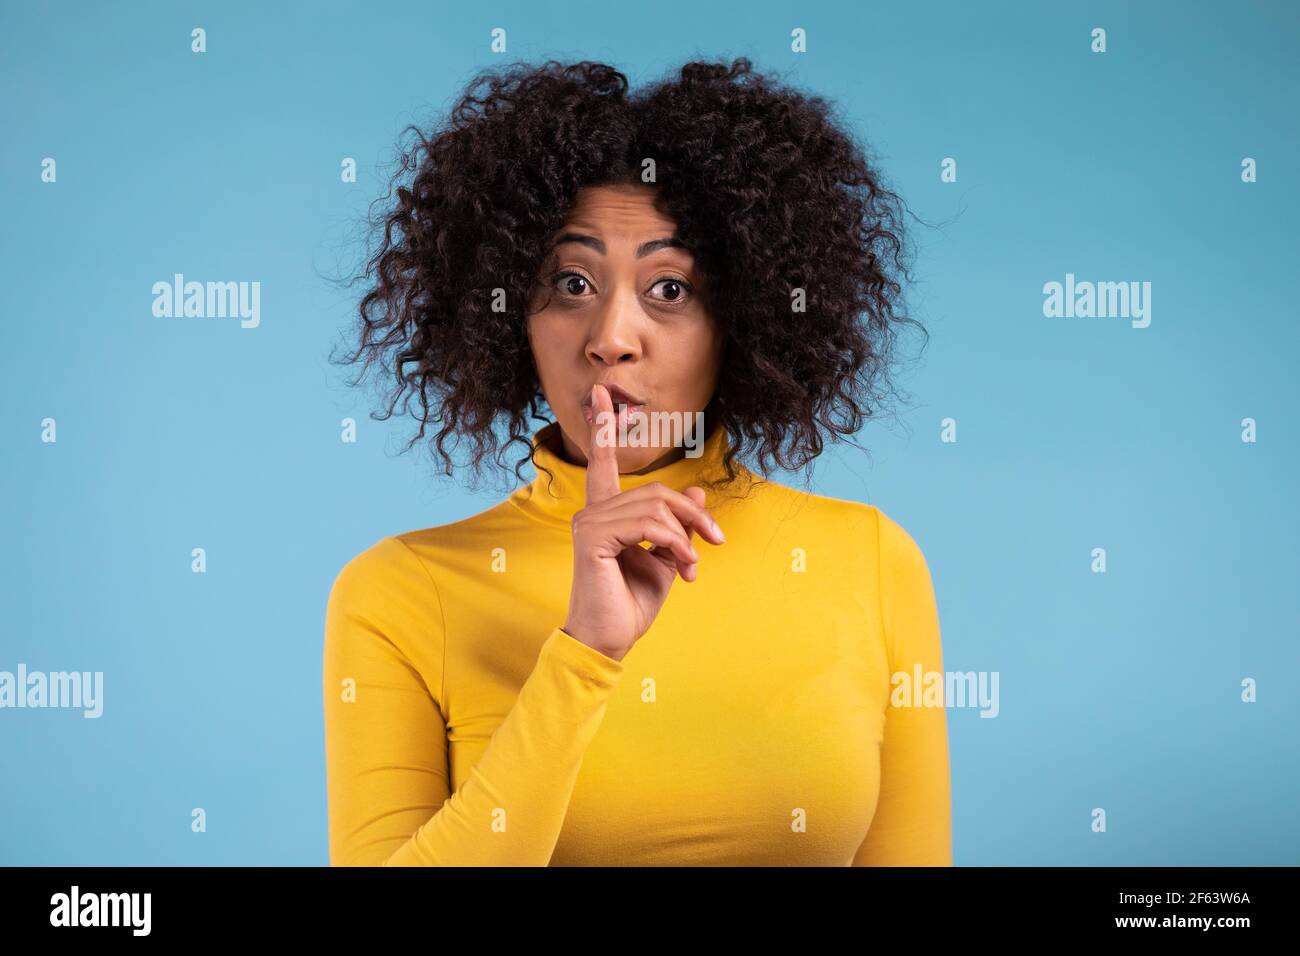 Smiling african woman with curly hair holding finger on her lips over blue background. Gesture of shhh, secret, silence. Close up Stock Photo